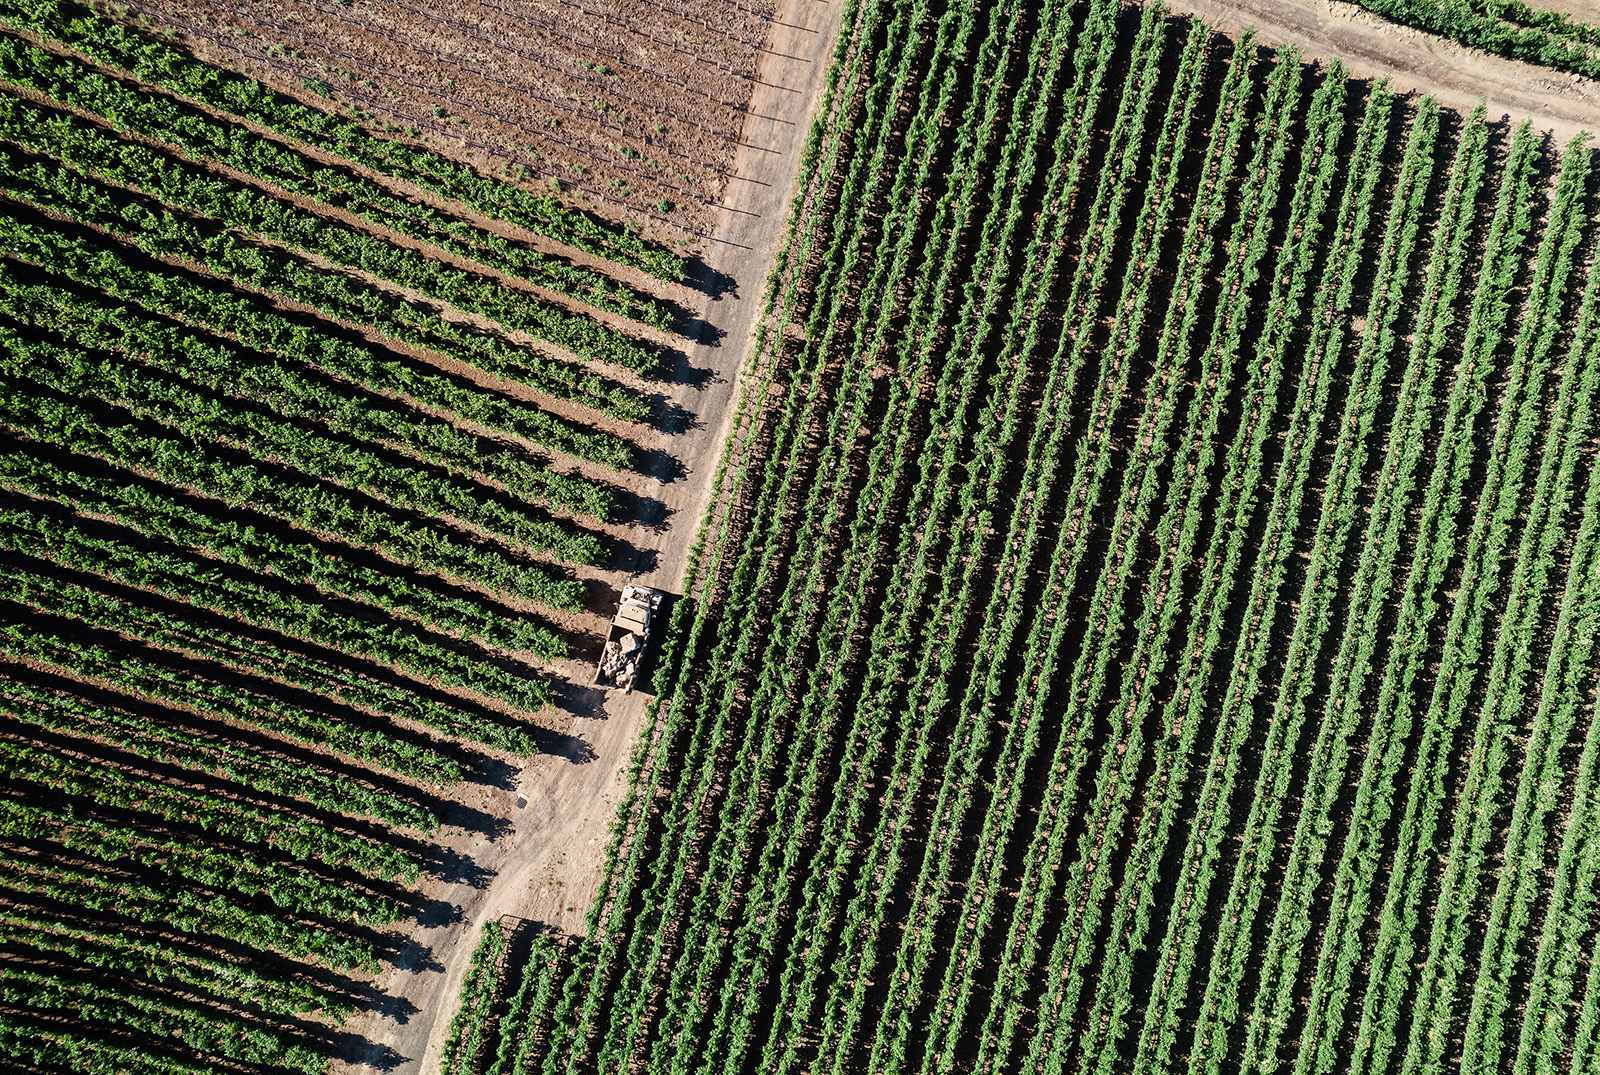 Aerial photo of truck driving on road through vineyard